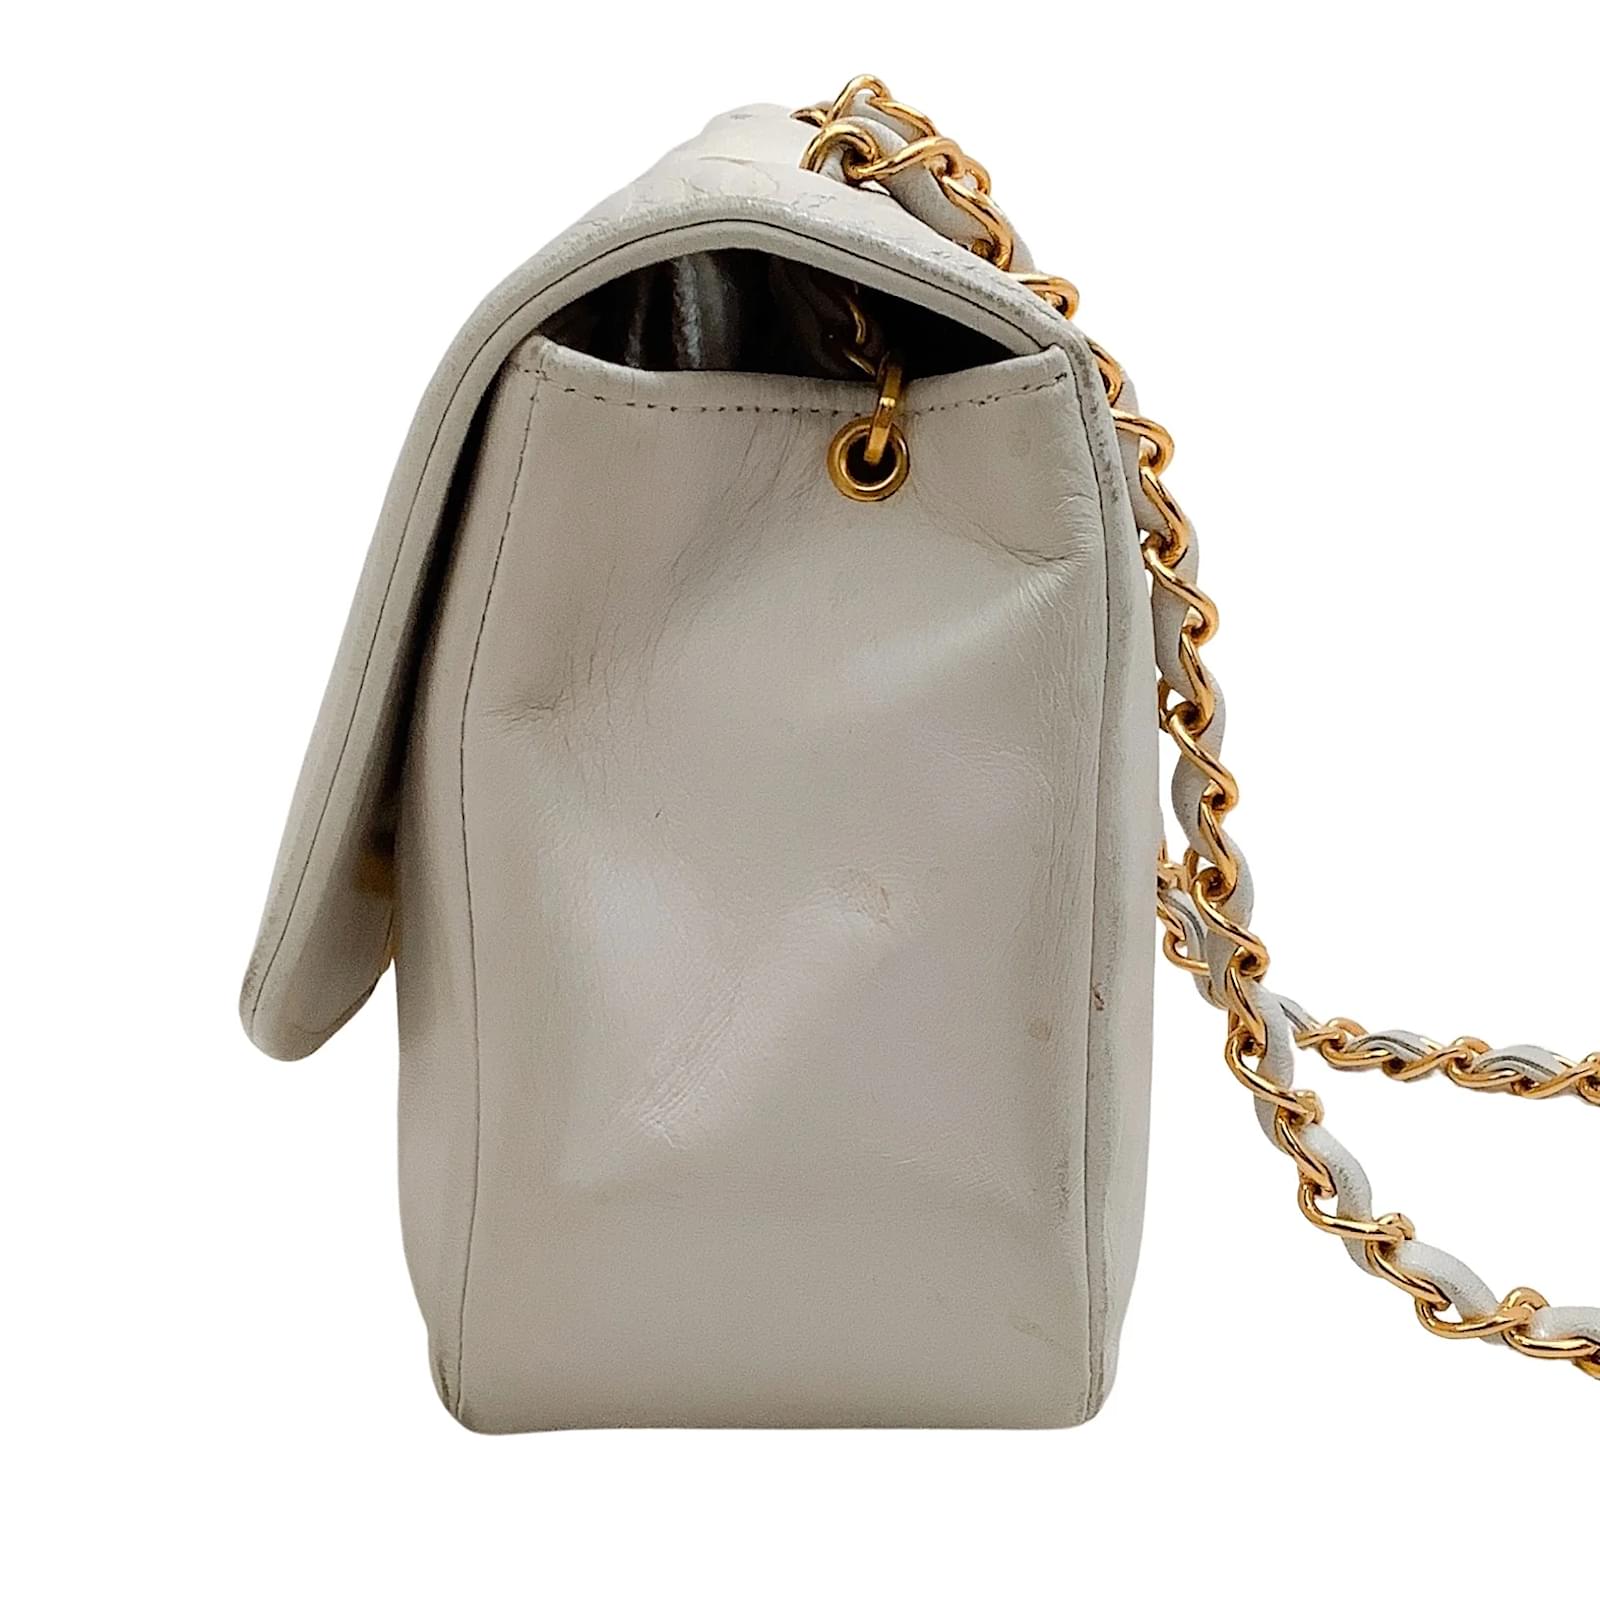 Chanel pre-owned 1989-1991 small - Gem